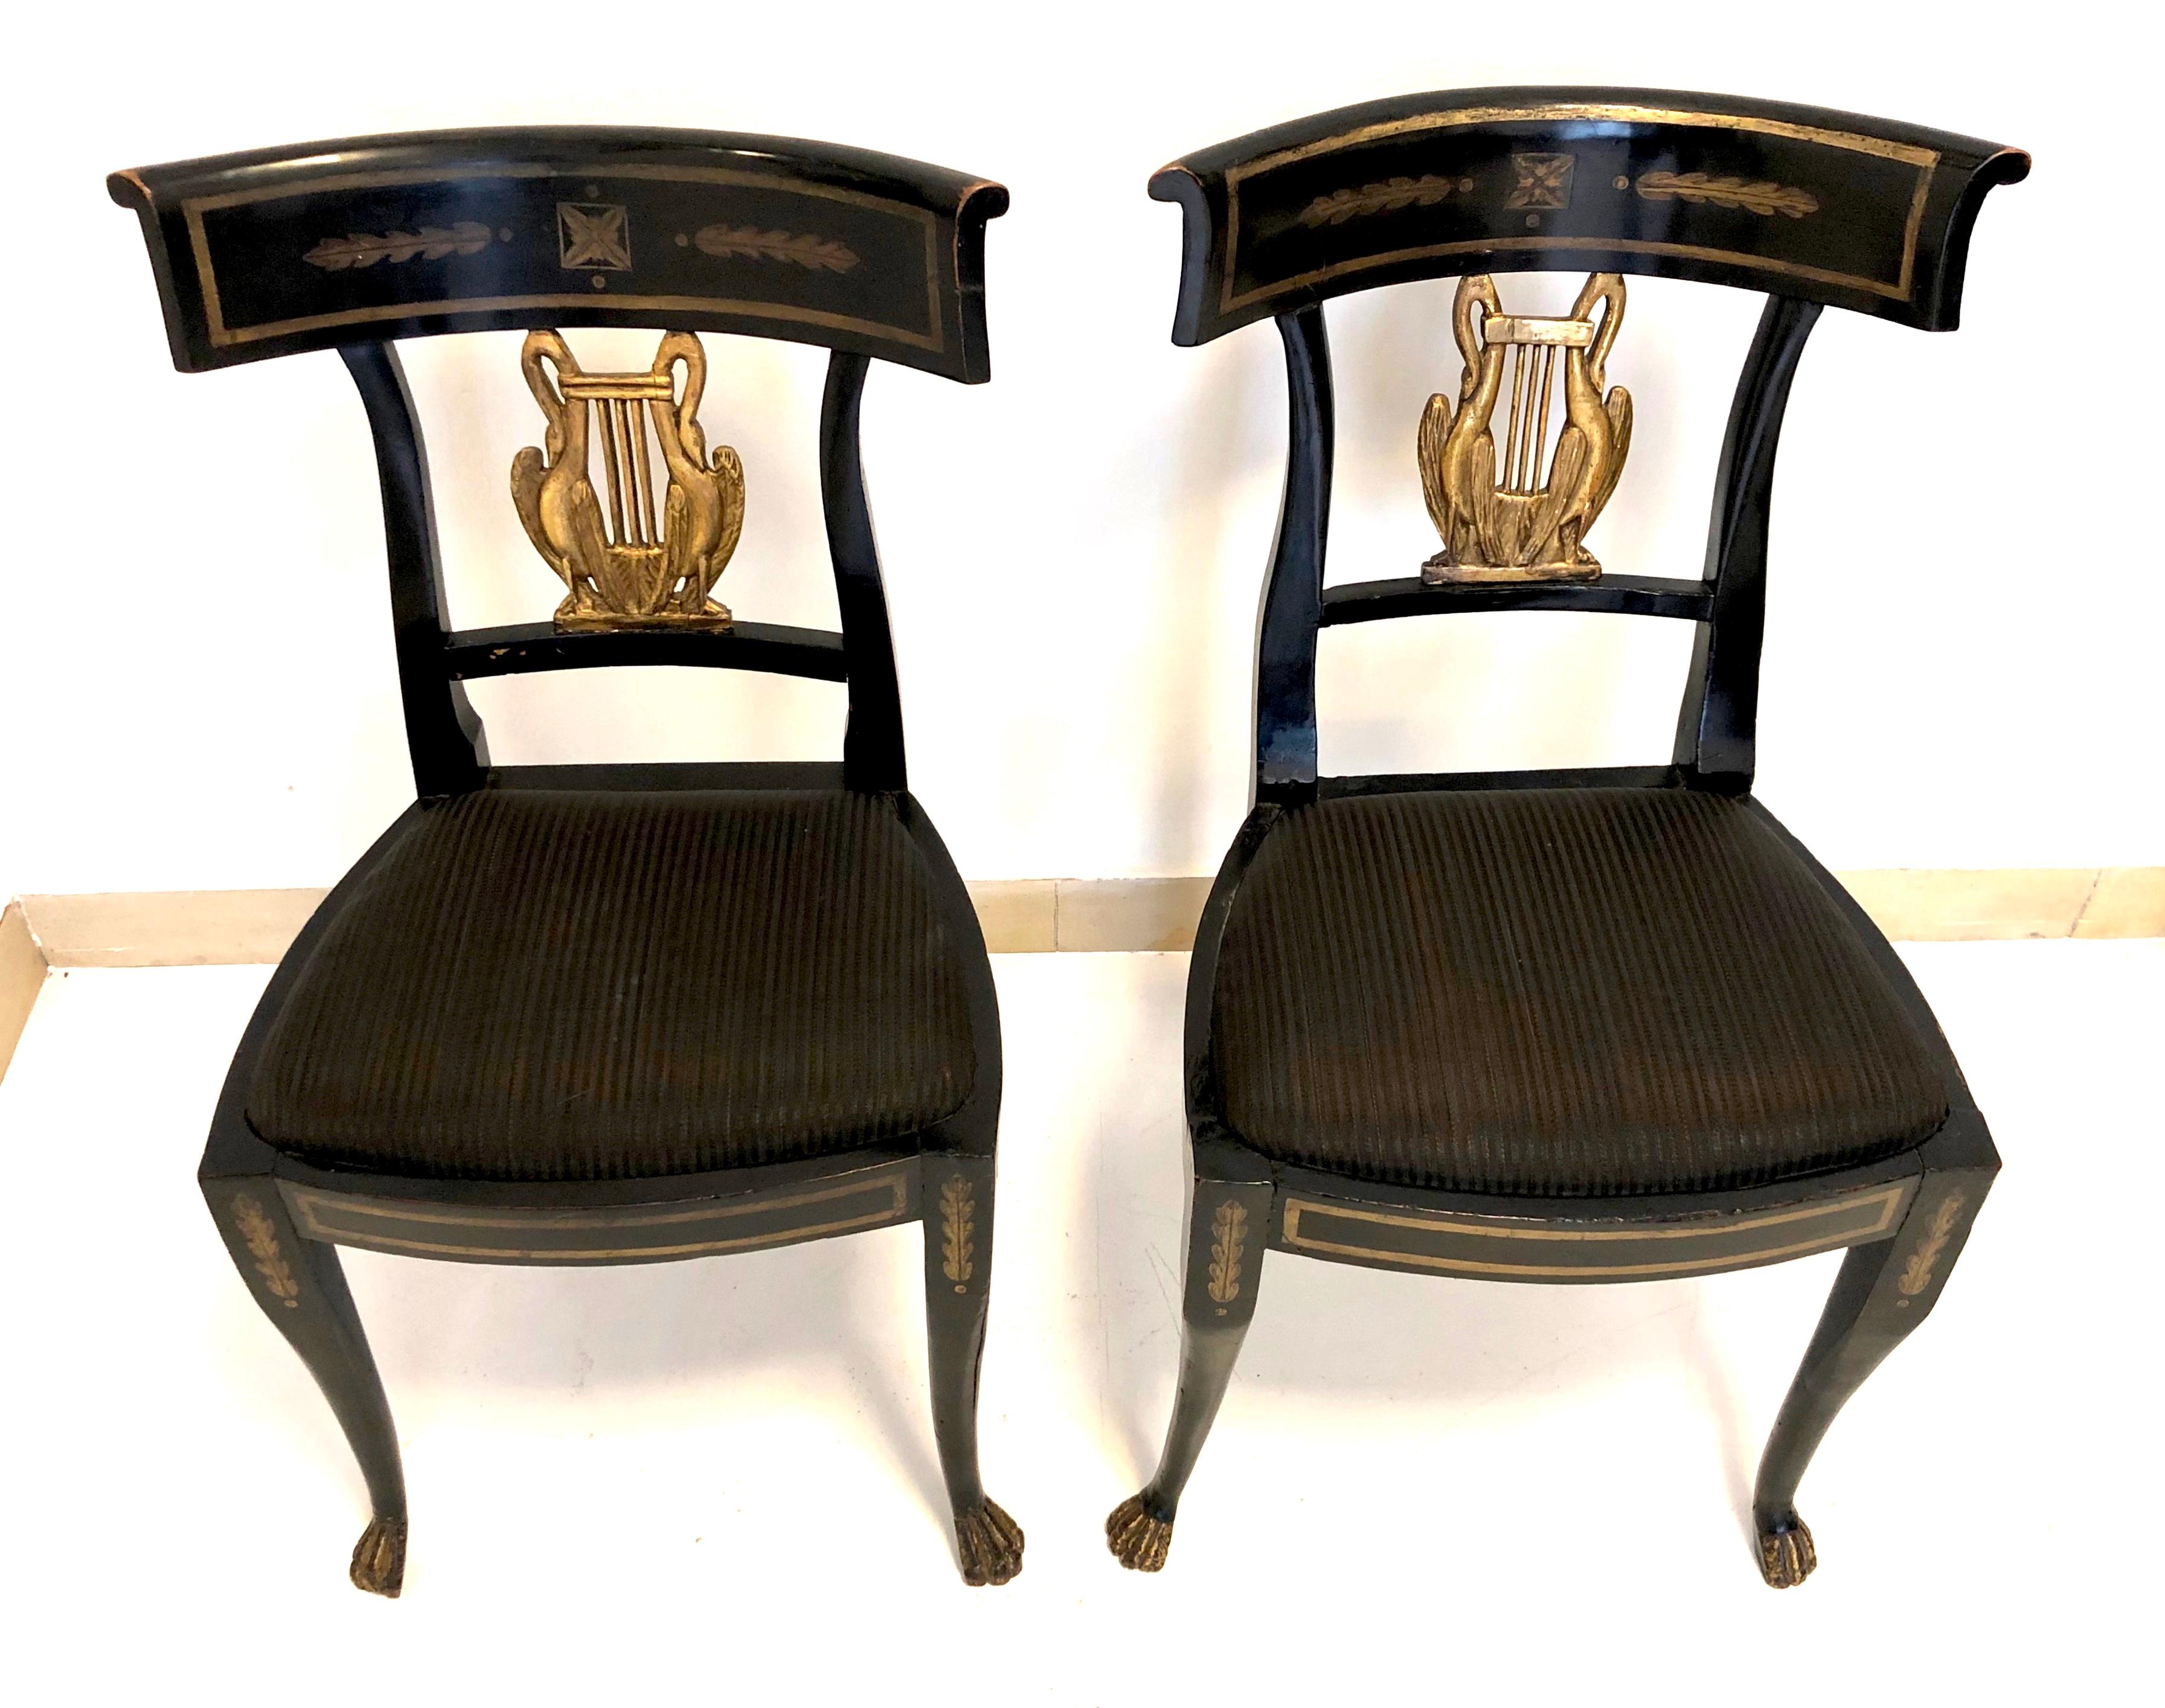 An extremely rare set of six Empire chairs, made out of ebonized beechwood in Italy-Lucca, circa 1815, at the time when the sister of Napoleon was Duchess of Tuscany. The front legs are slightly curved and terminate in carved lion paws.The chair